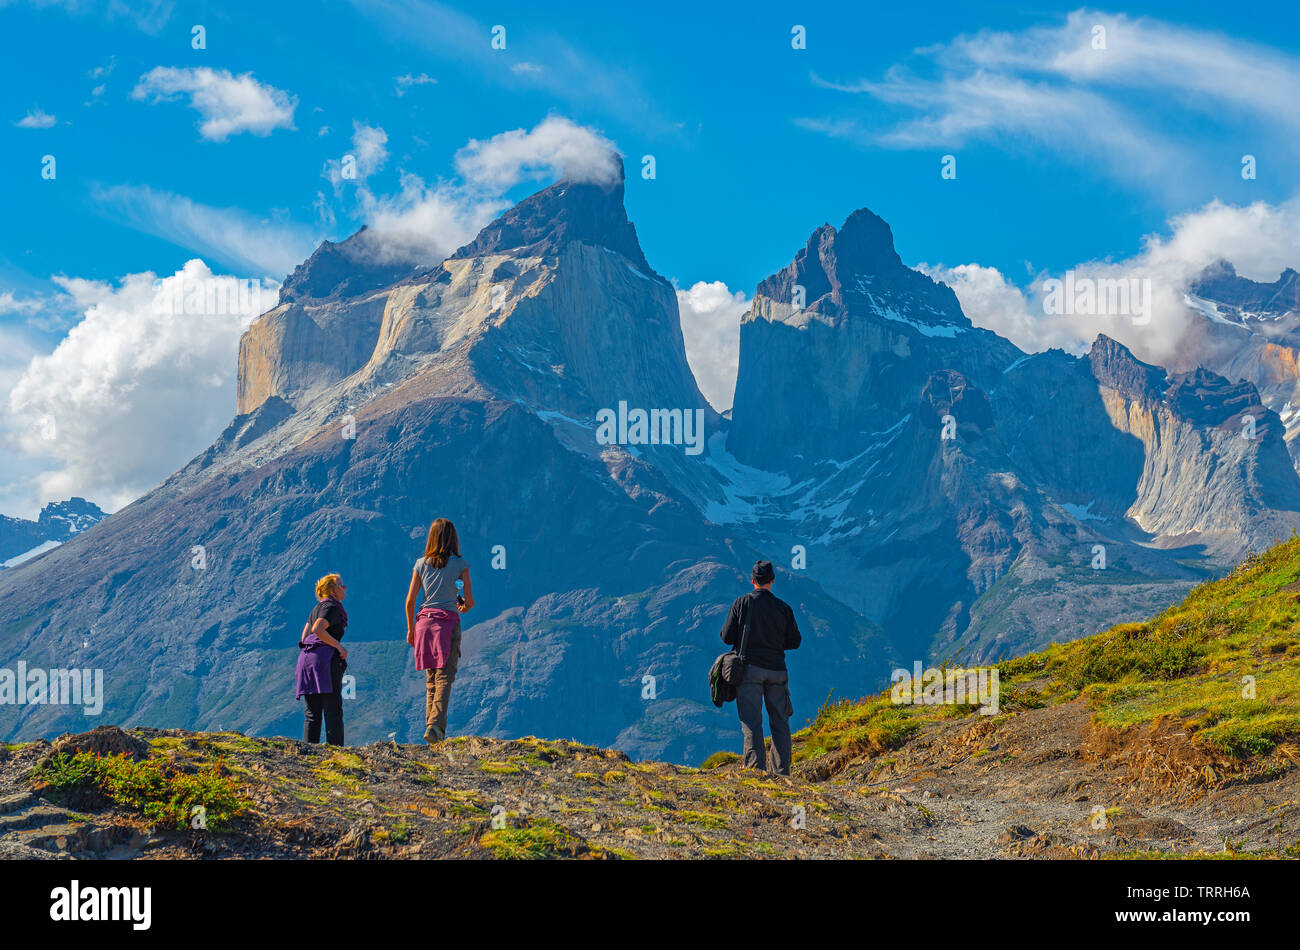 A group of three tourists looking upon the Andes peaks of Cuernos del Paine in Chilean Patagonia. Unsharp foreground, sharp background. Stock Photo